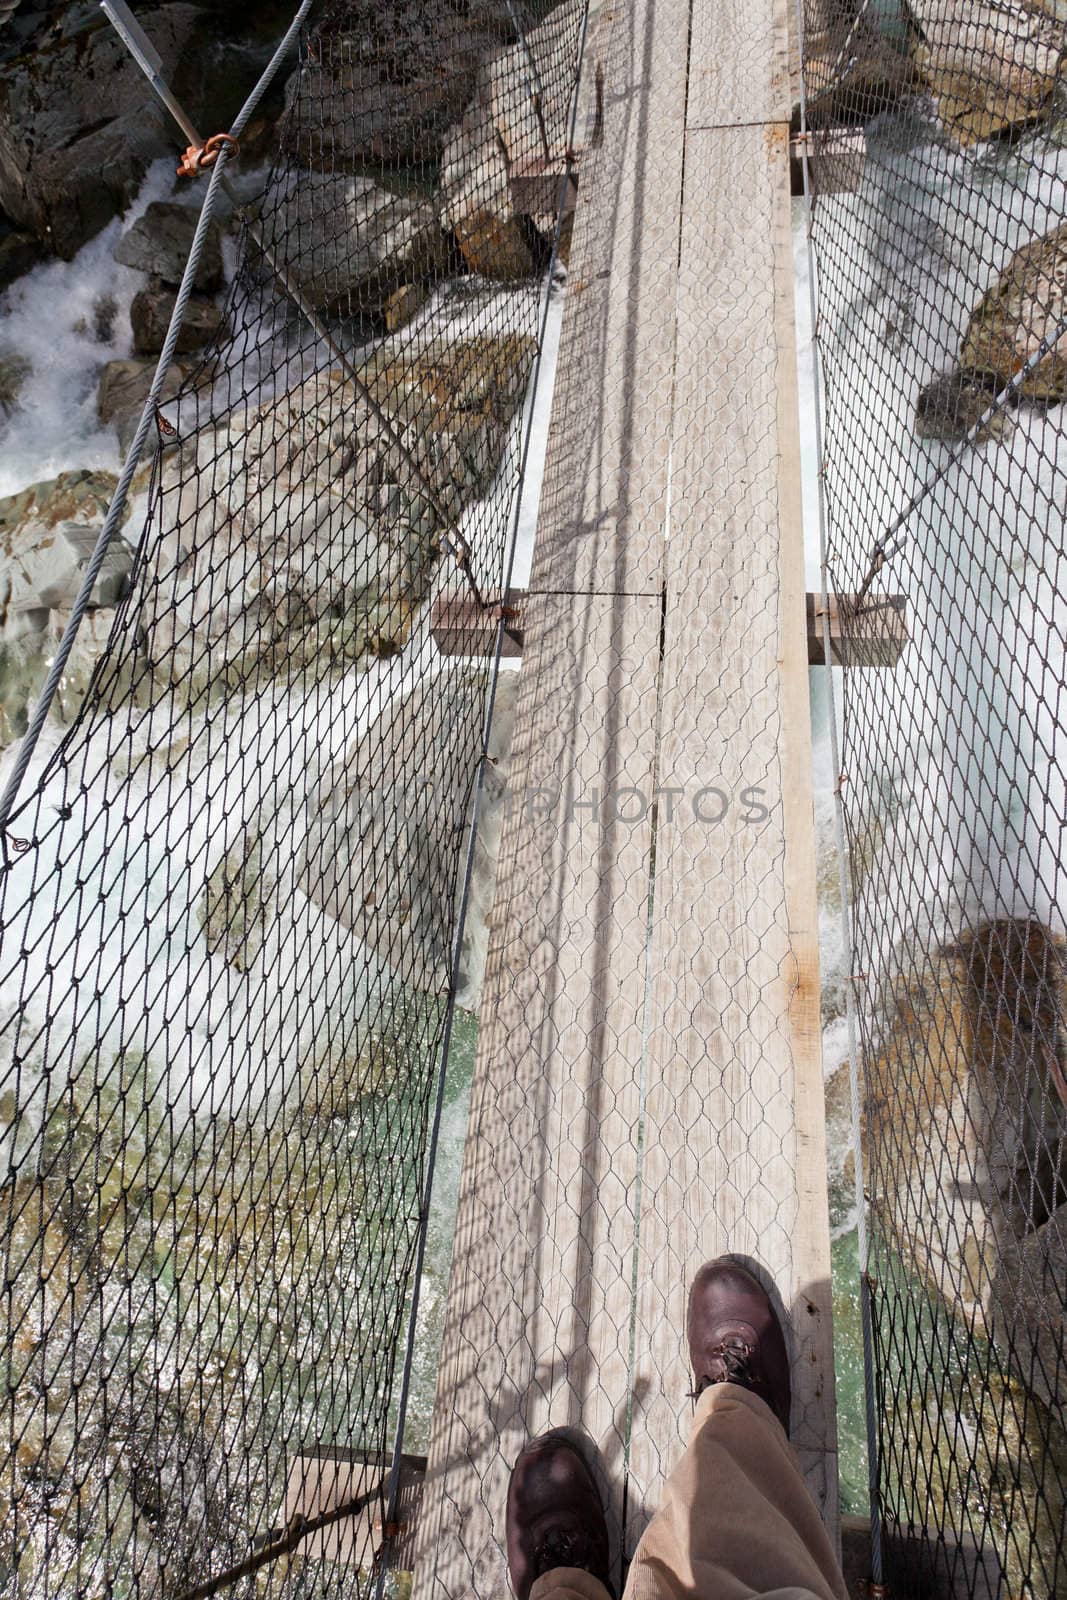 Booted feet of man walking on narrow swing bridge over clear fresh white water rushing through a rocky gorge